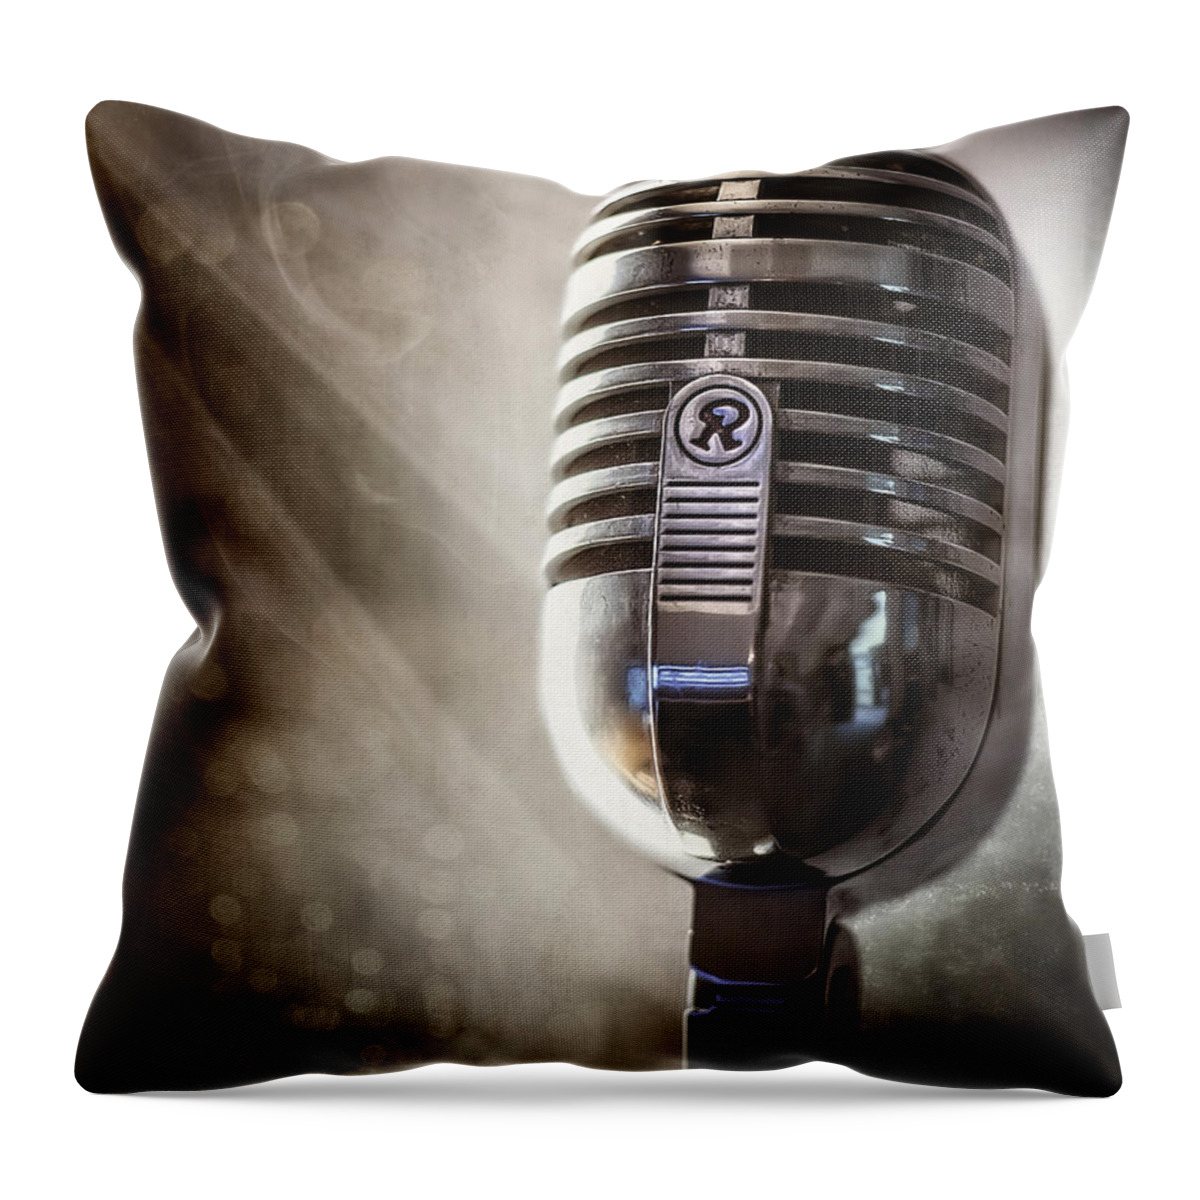 Mic Throw Pillow featuring the photograph Smoky Vintage Microphone by Scott Norris